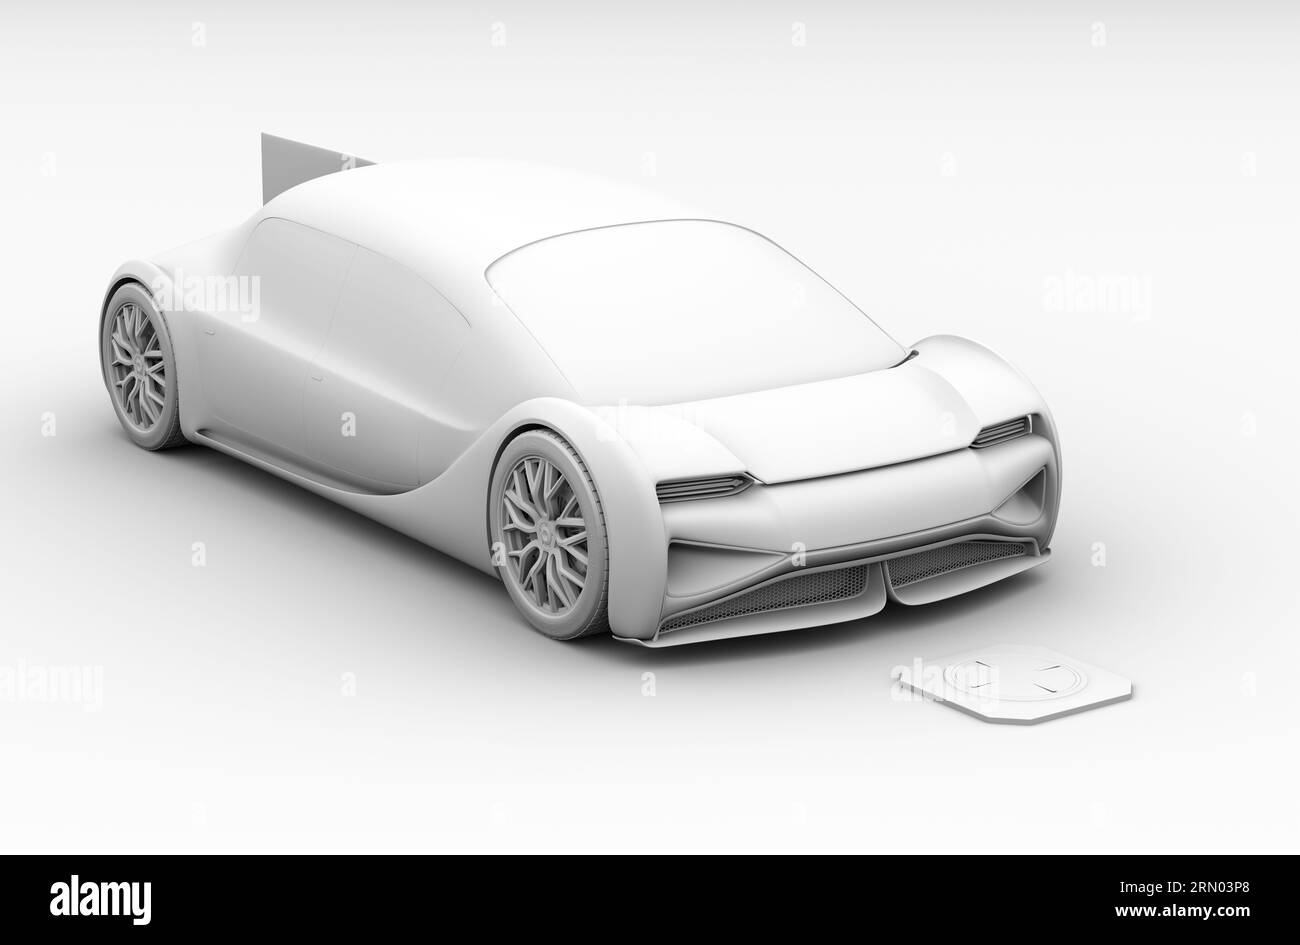 Isometric view of futuristic electric car driving into wireless charging parking lot. Clay rendering style. 3D rendering image. Stock Photo